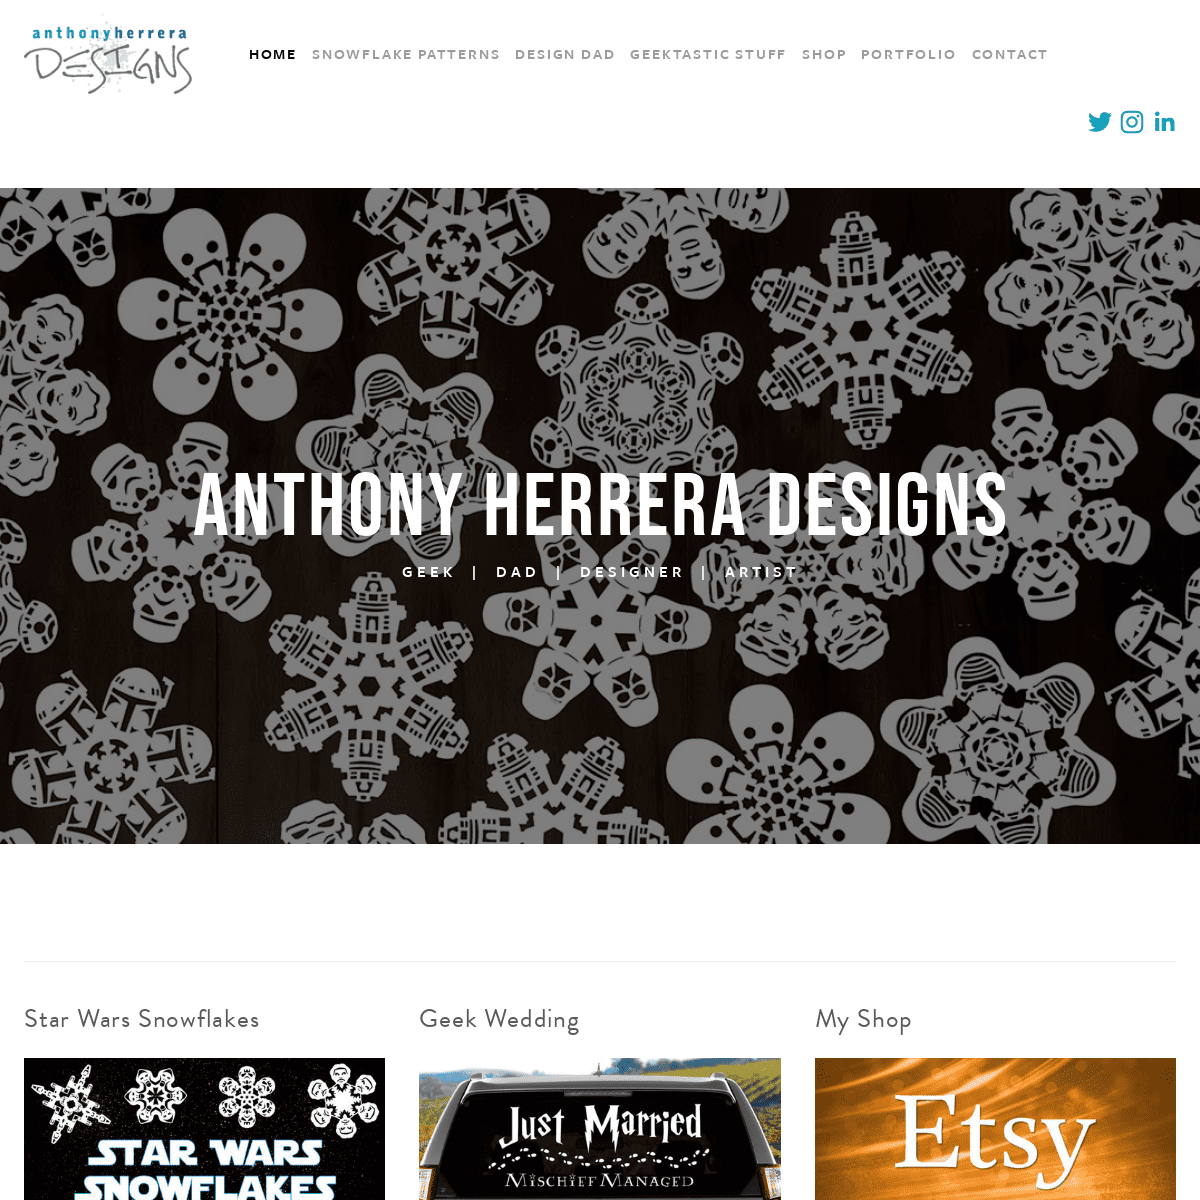 A complete backup of https://anthonyherreradesigns.com